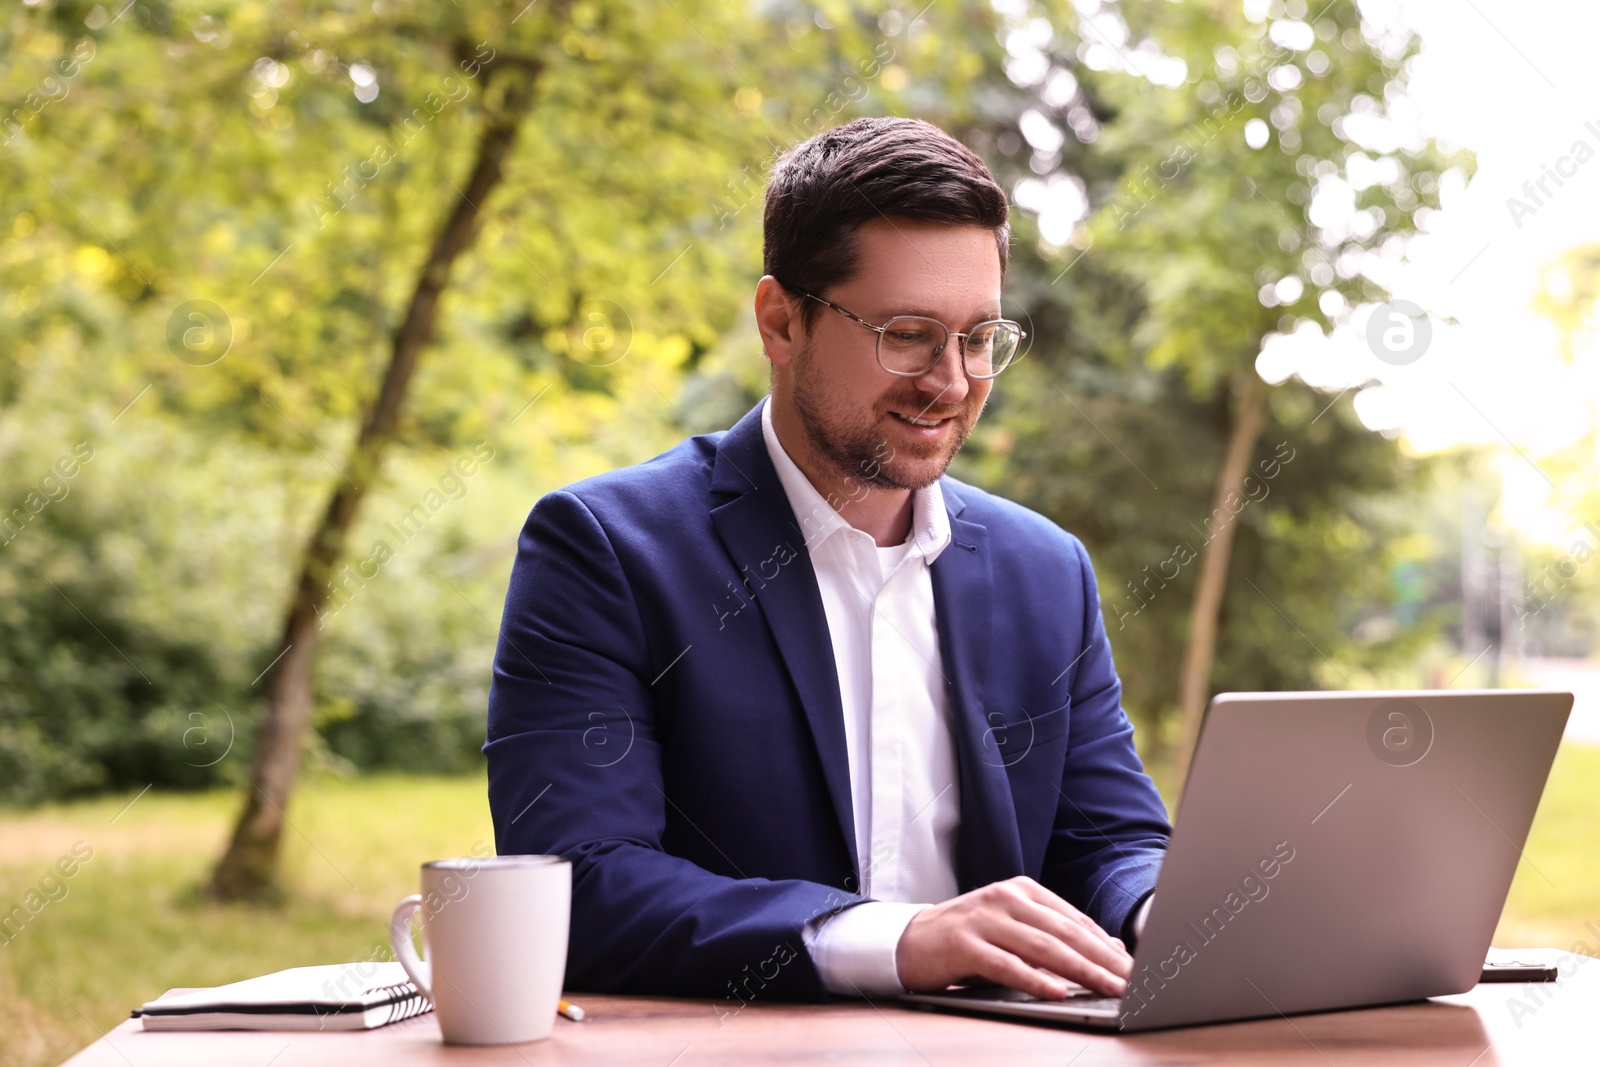 Photo of Smiling businessman working with laptop at table outdoors. Remote job